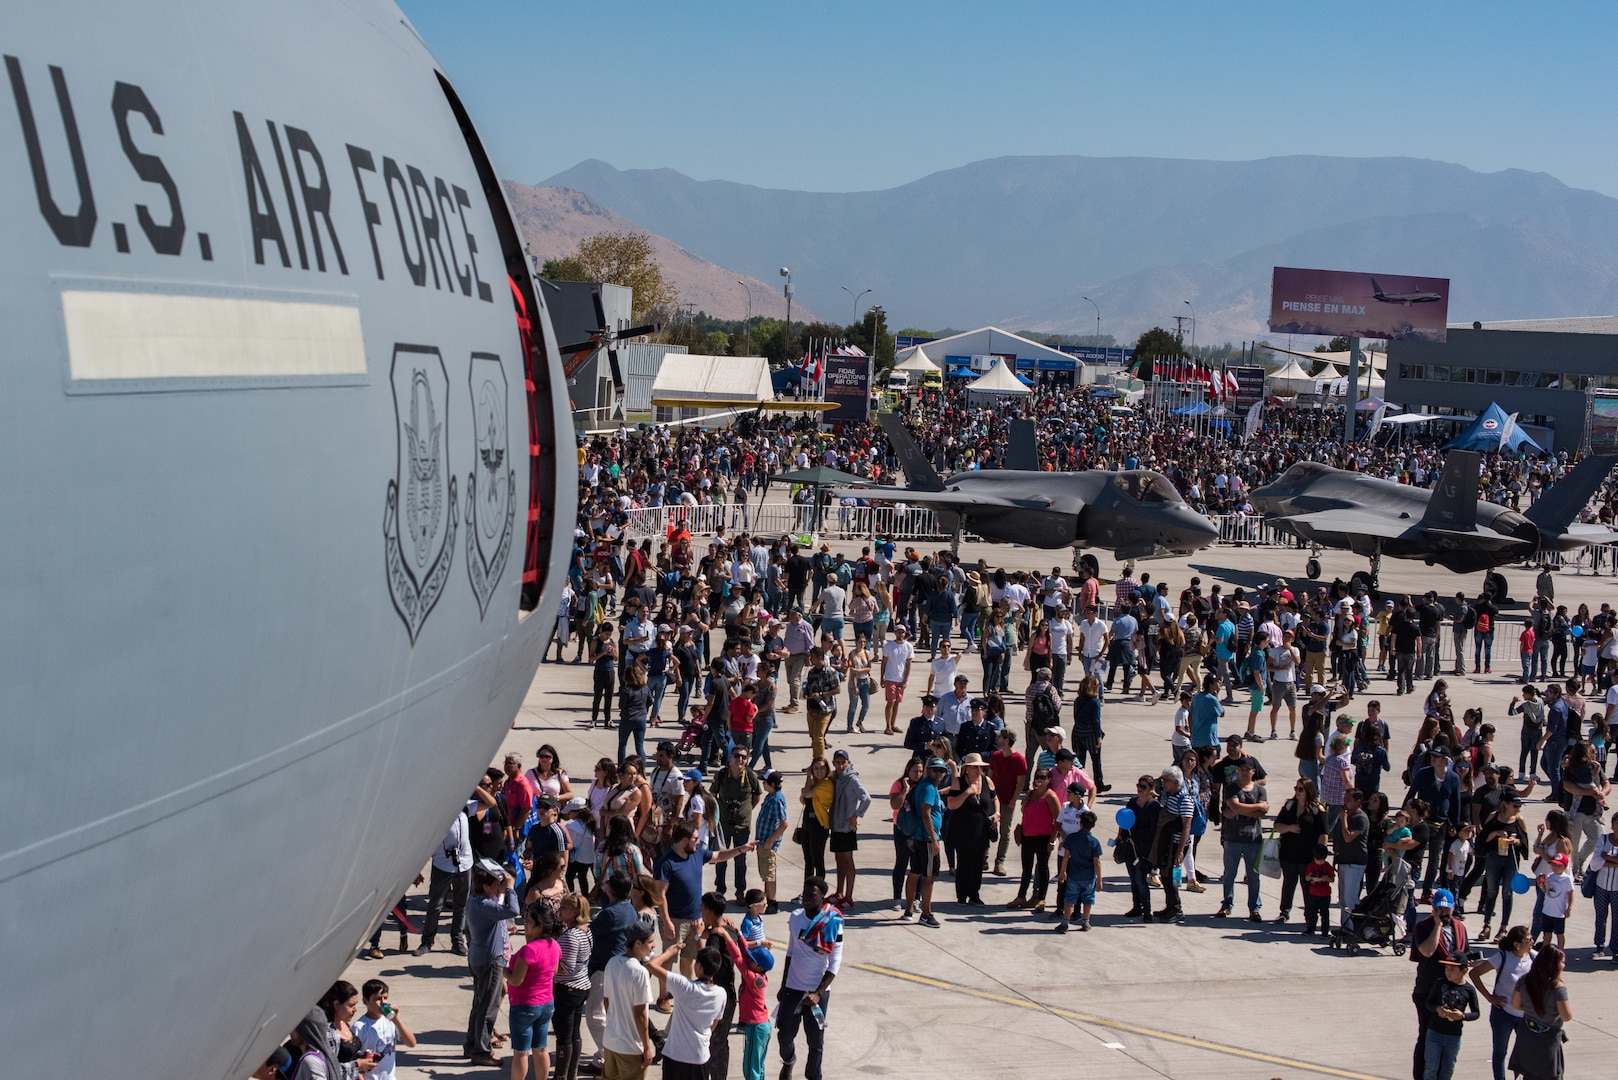 Members of the Chilean public walk through the airshow fairgrounds during the FIDAE 2018 international airshow in Santiago, Chile, April 8, 2018.  U.S. airmen participated in a variety of activities during the air show, including subject matter exchanges with the Chilean Air Force, aerial demonstrations, and interaction with the local community.  (U.S. Air Force photo by Staff Sgt. Danny Rangel)